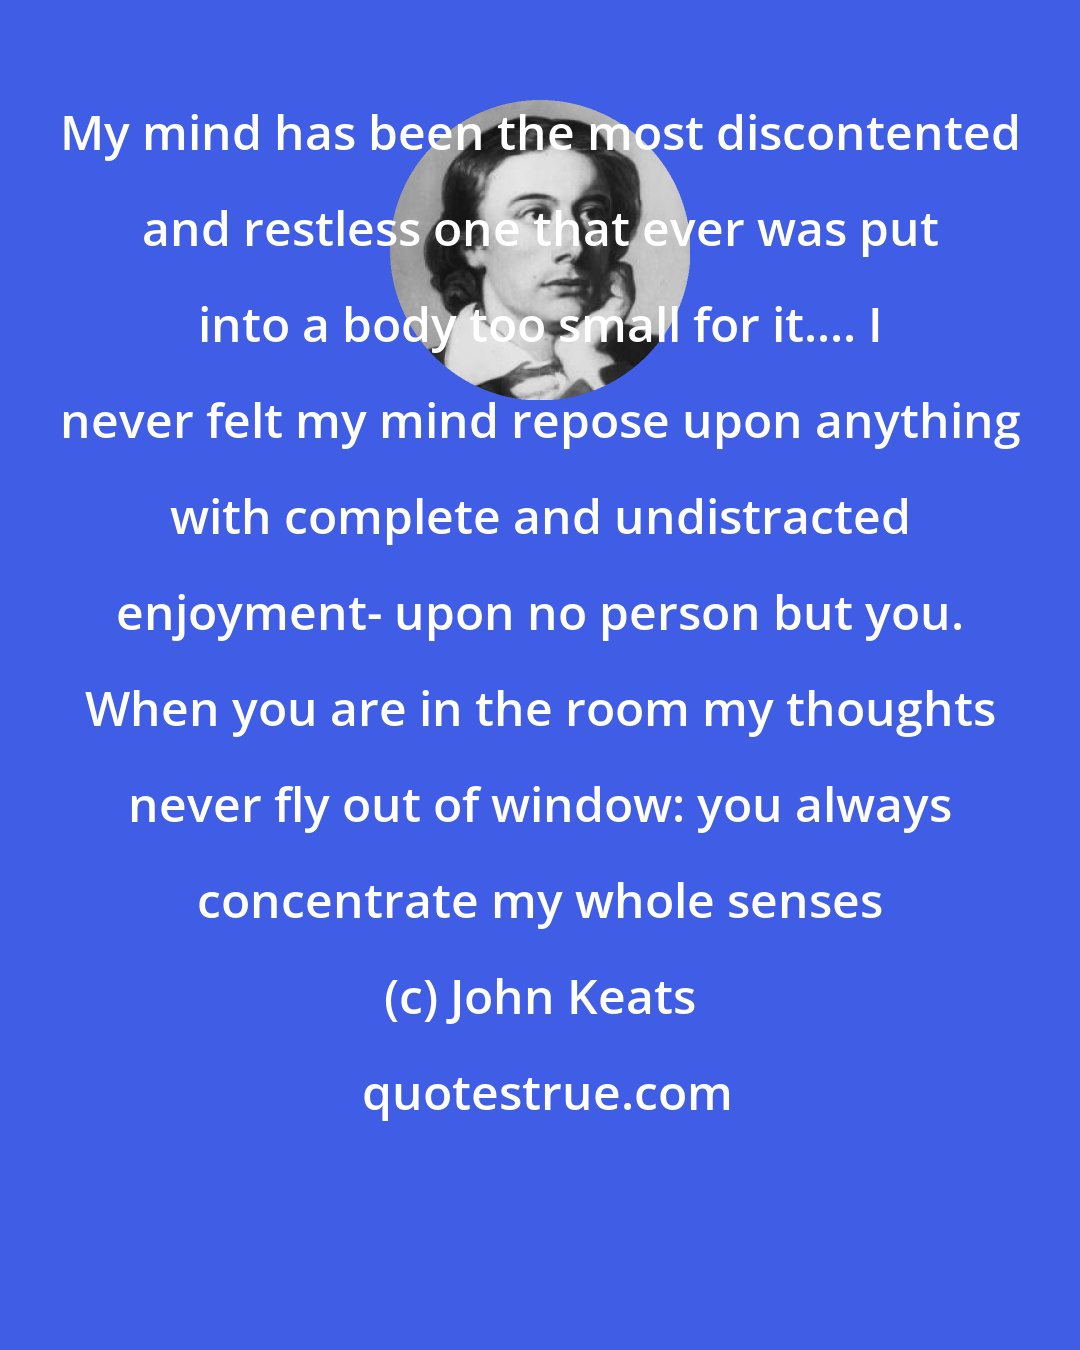 John Keats: My mind has been the most discontented and restless one that ever was put into a body too small for it.... I never felt my mind repose upon anything with complete and undistracted enjoyment- upon no person but you. When you are in the room my thoughts never fly out of window: you always concentrate my whole senses